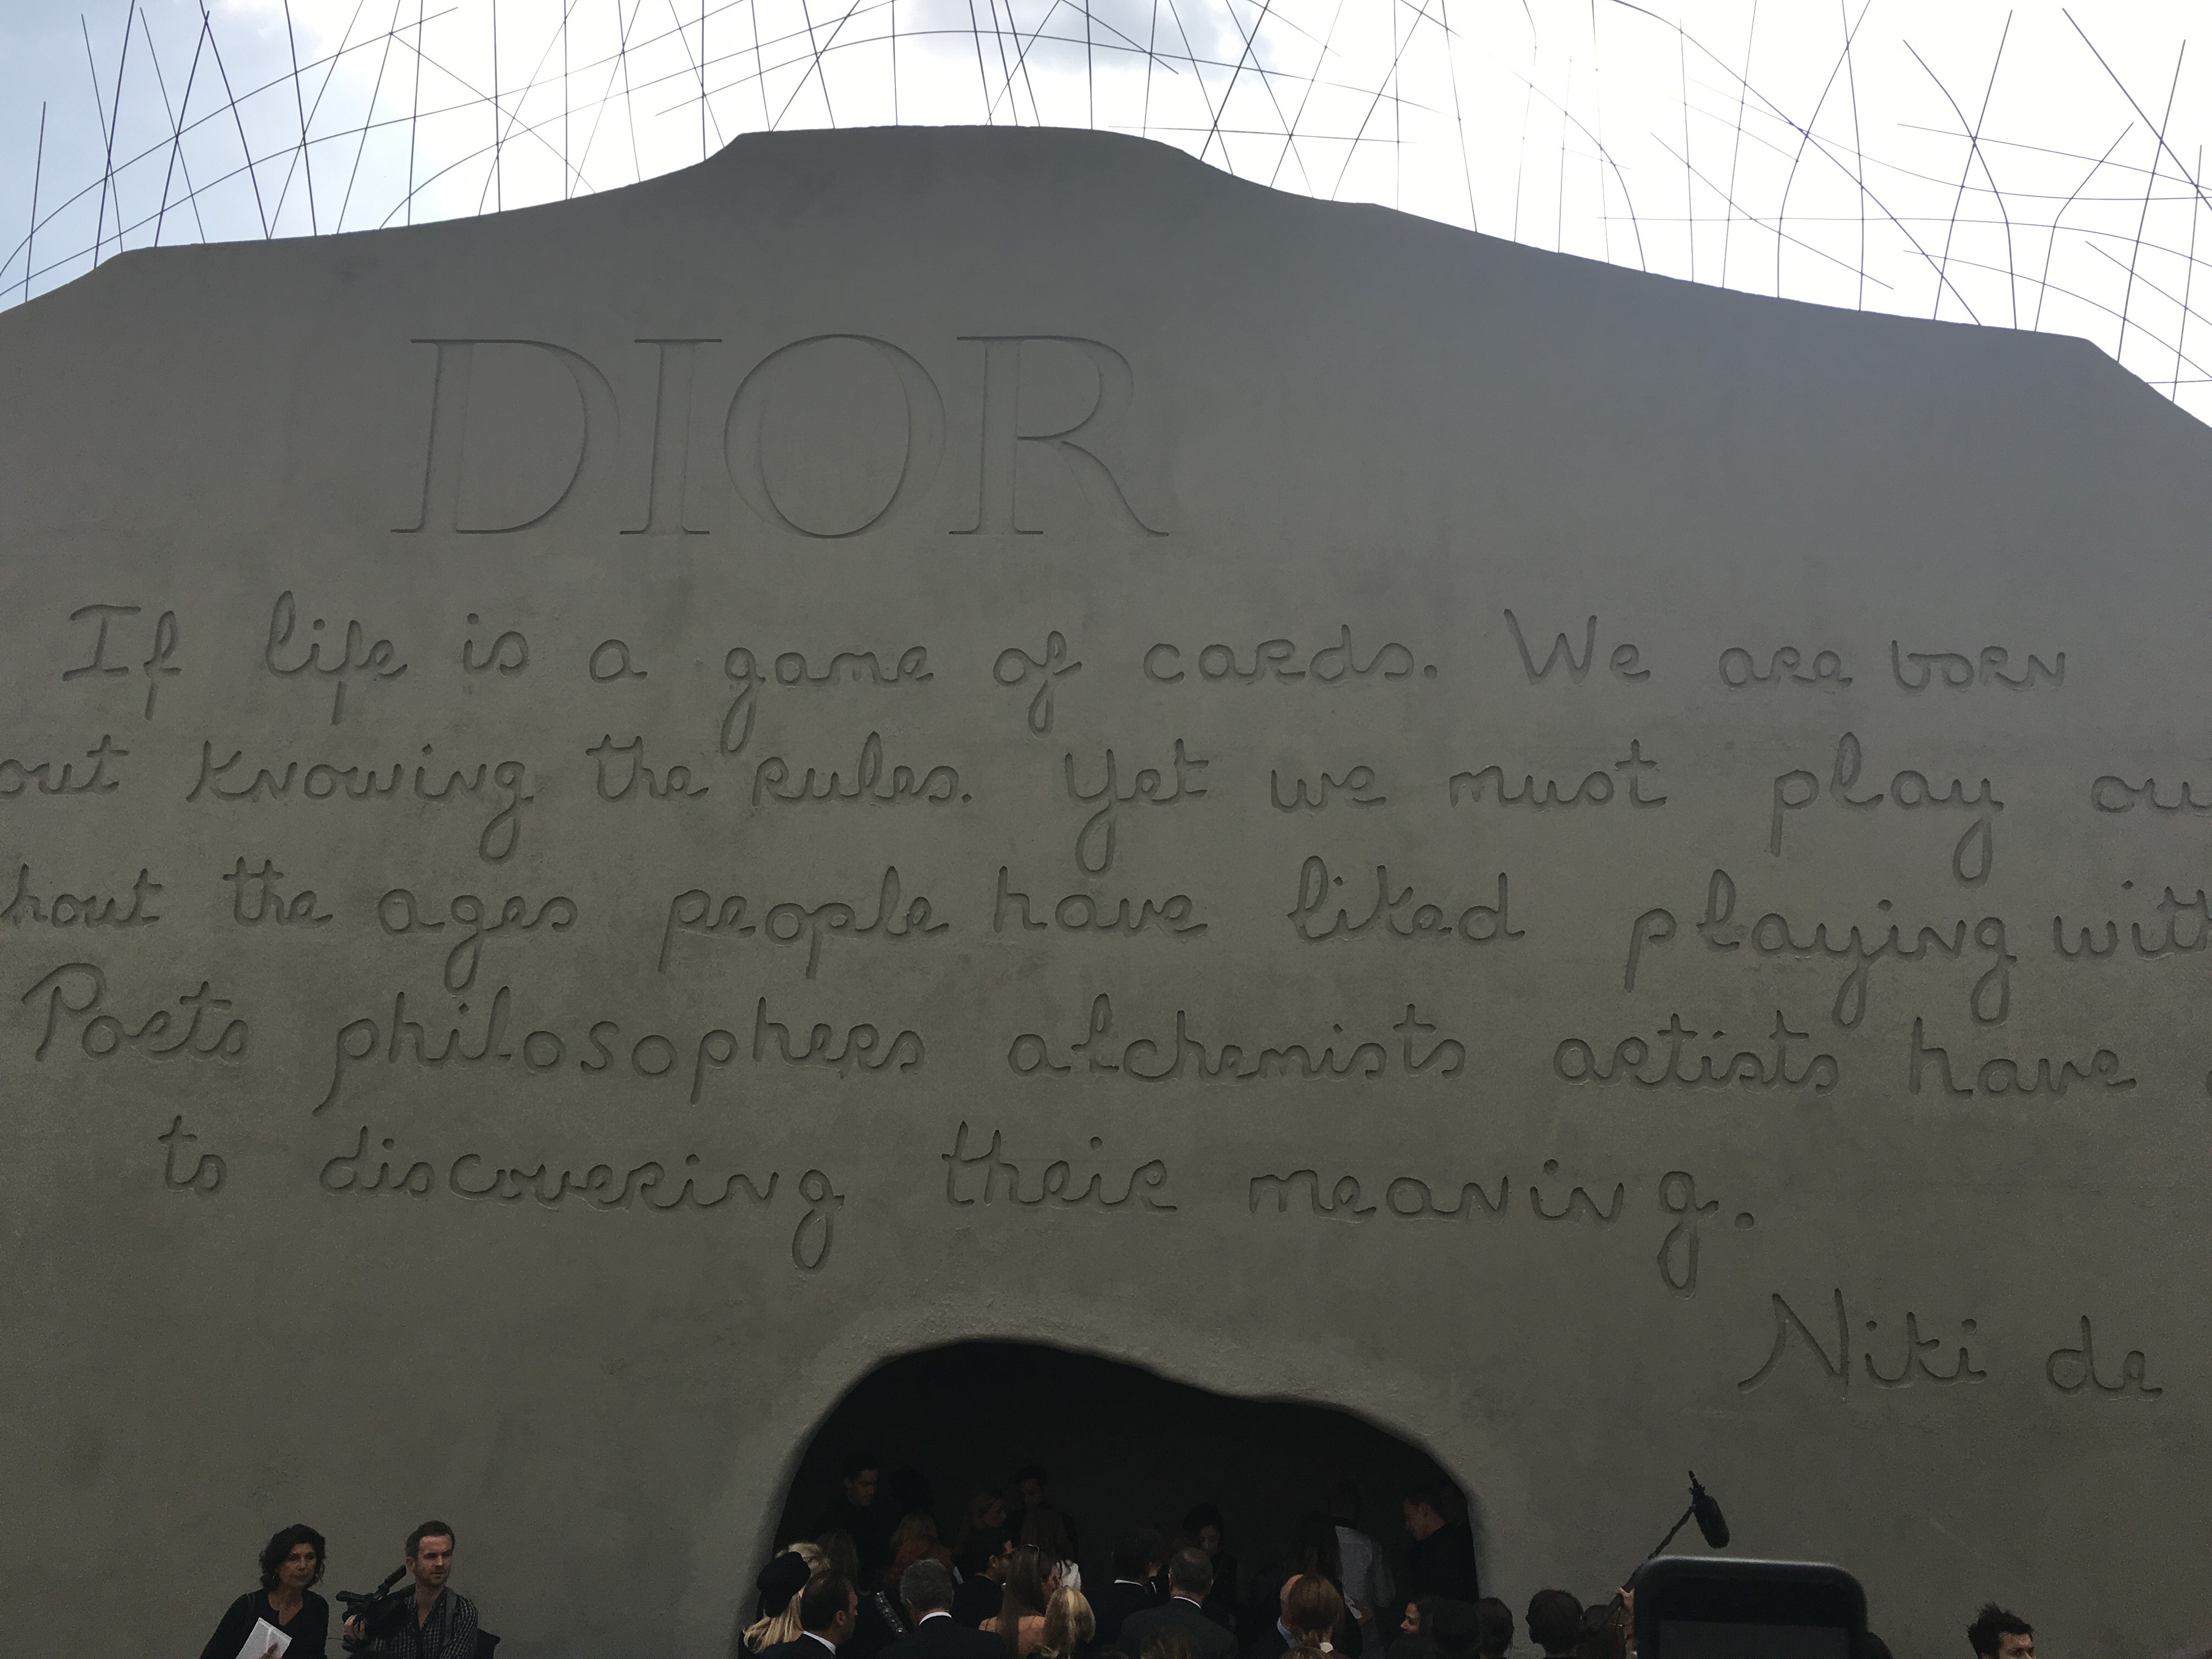 Outside the Dior show